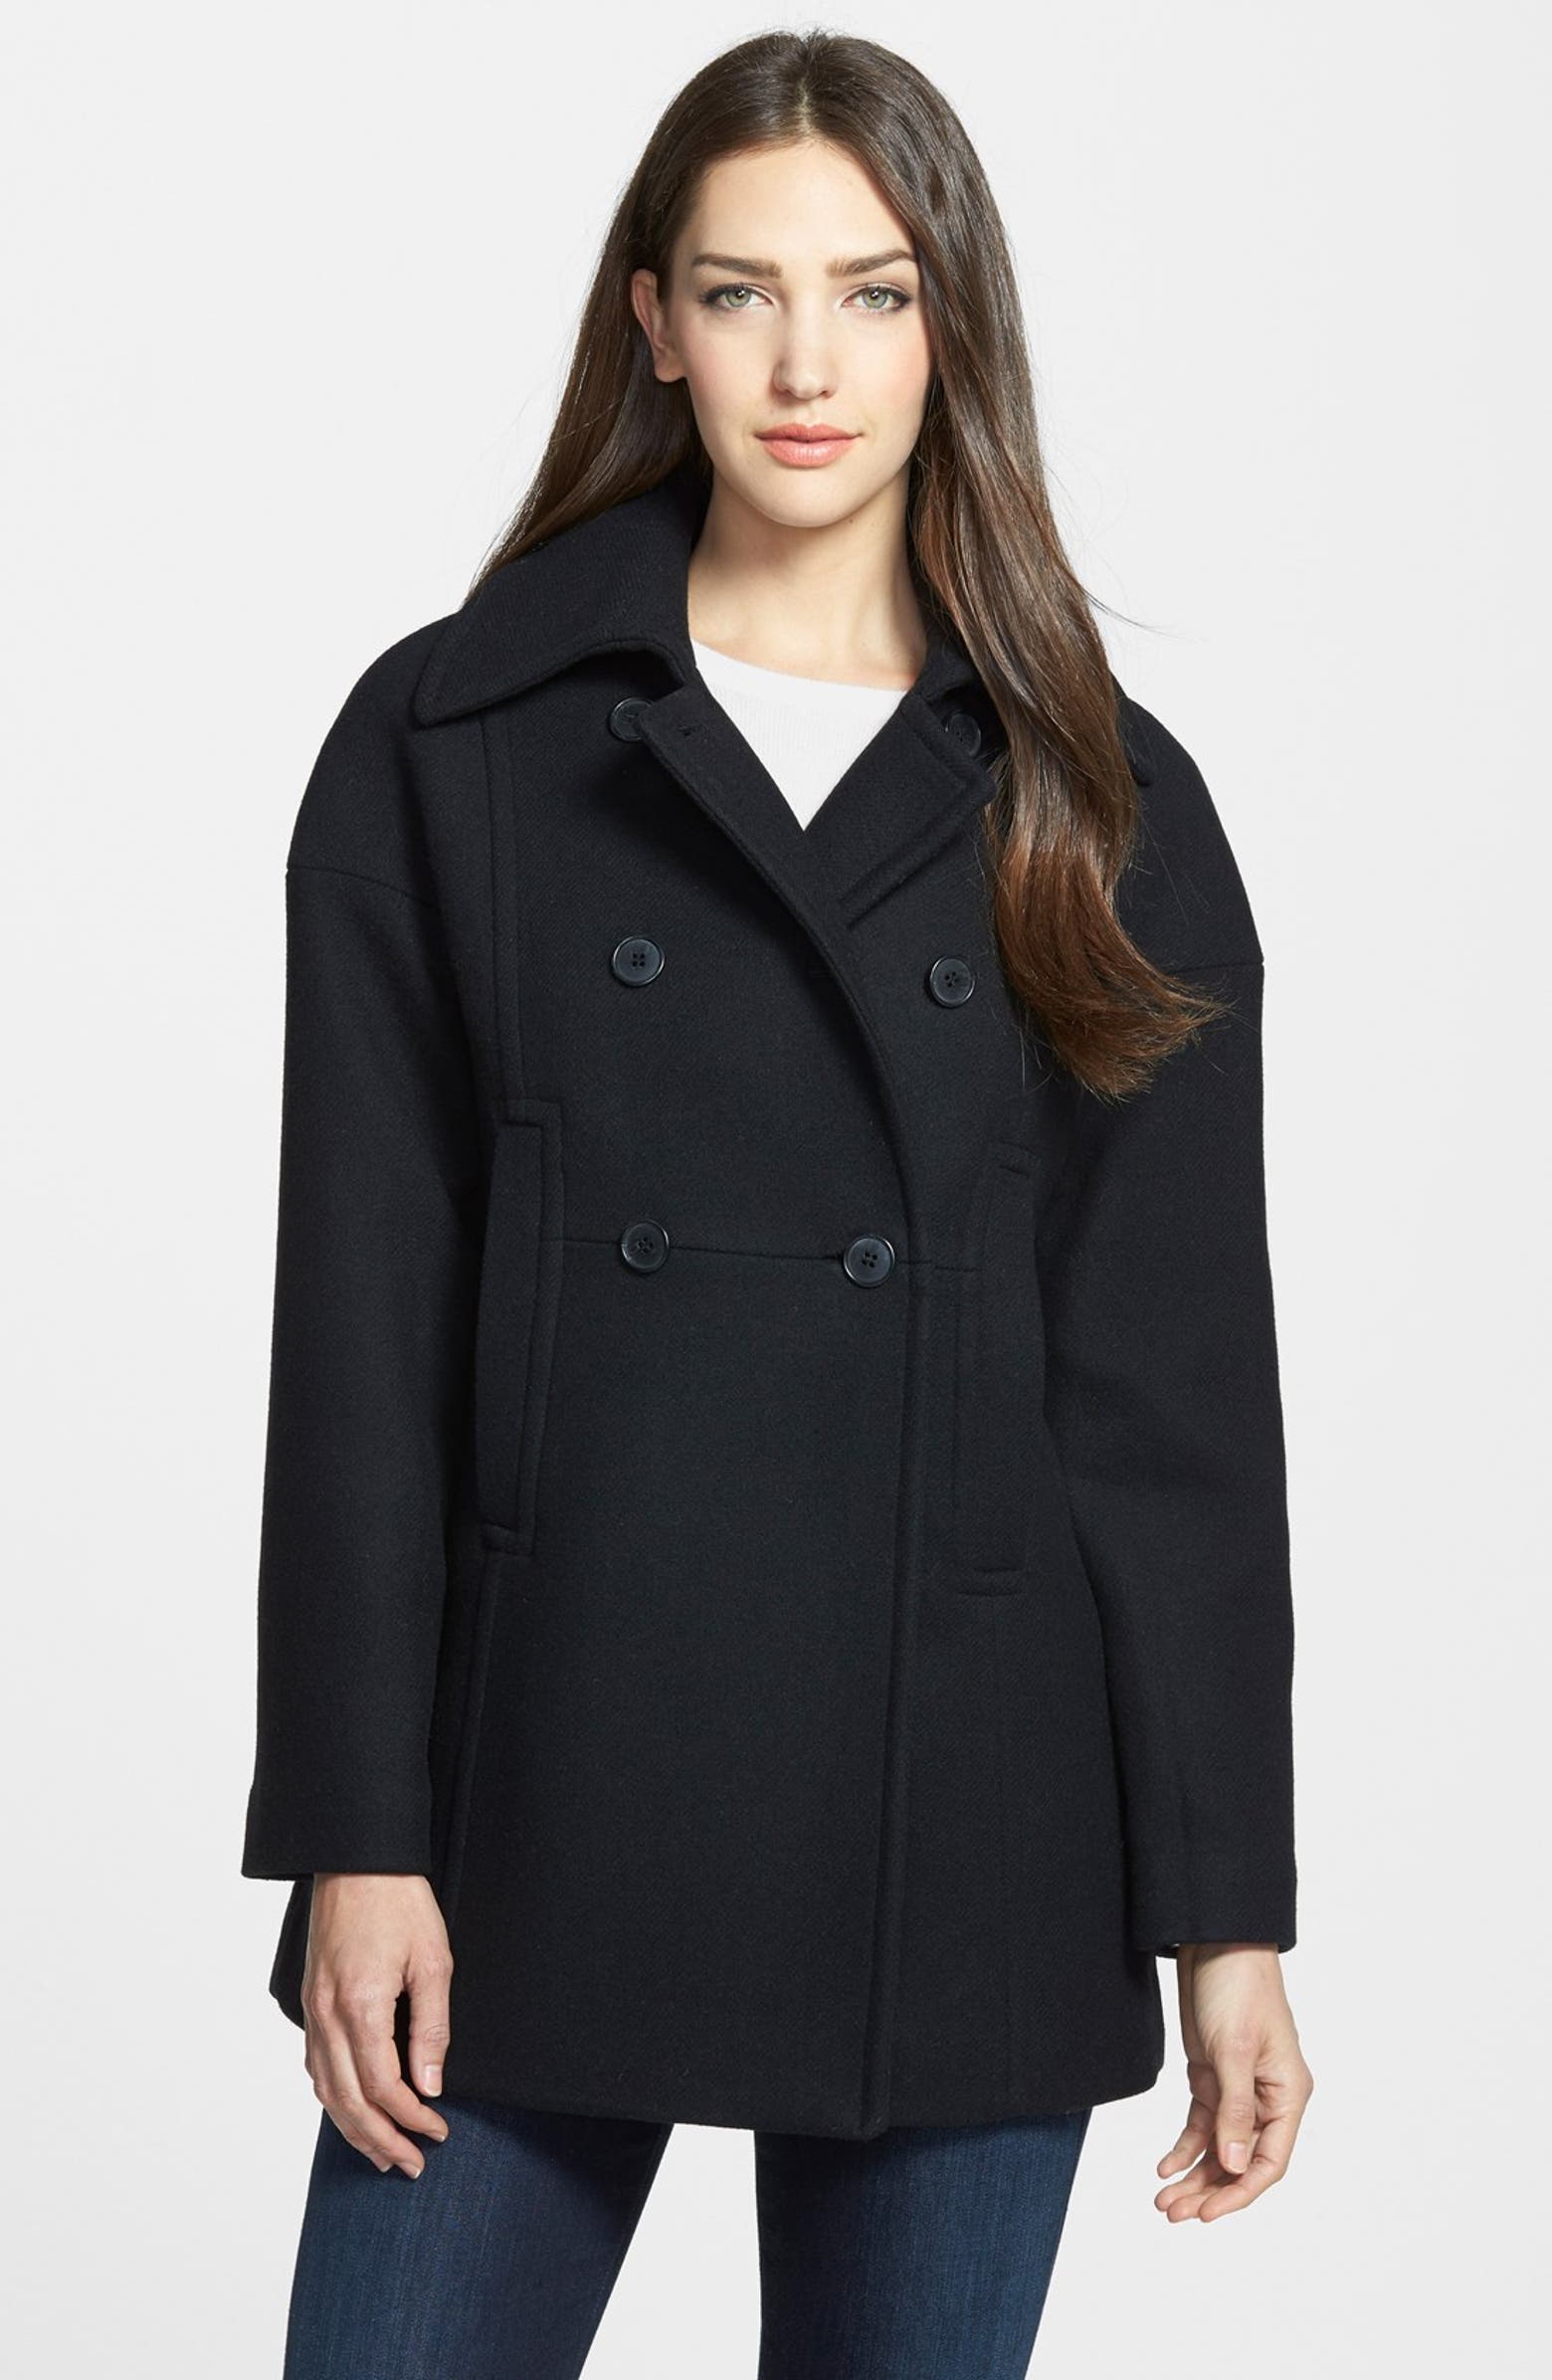 Trina Turk Double Breasted Wool Blend Peacoat | Nordstrom